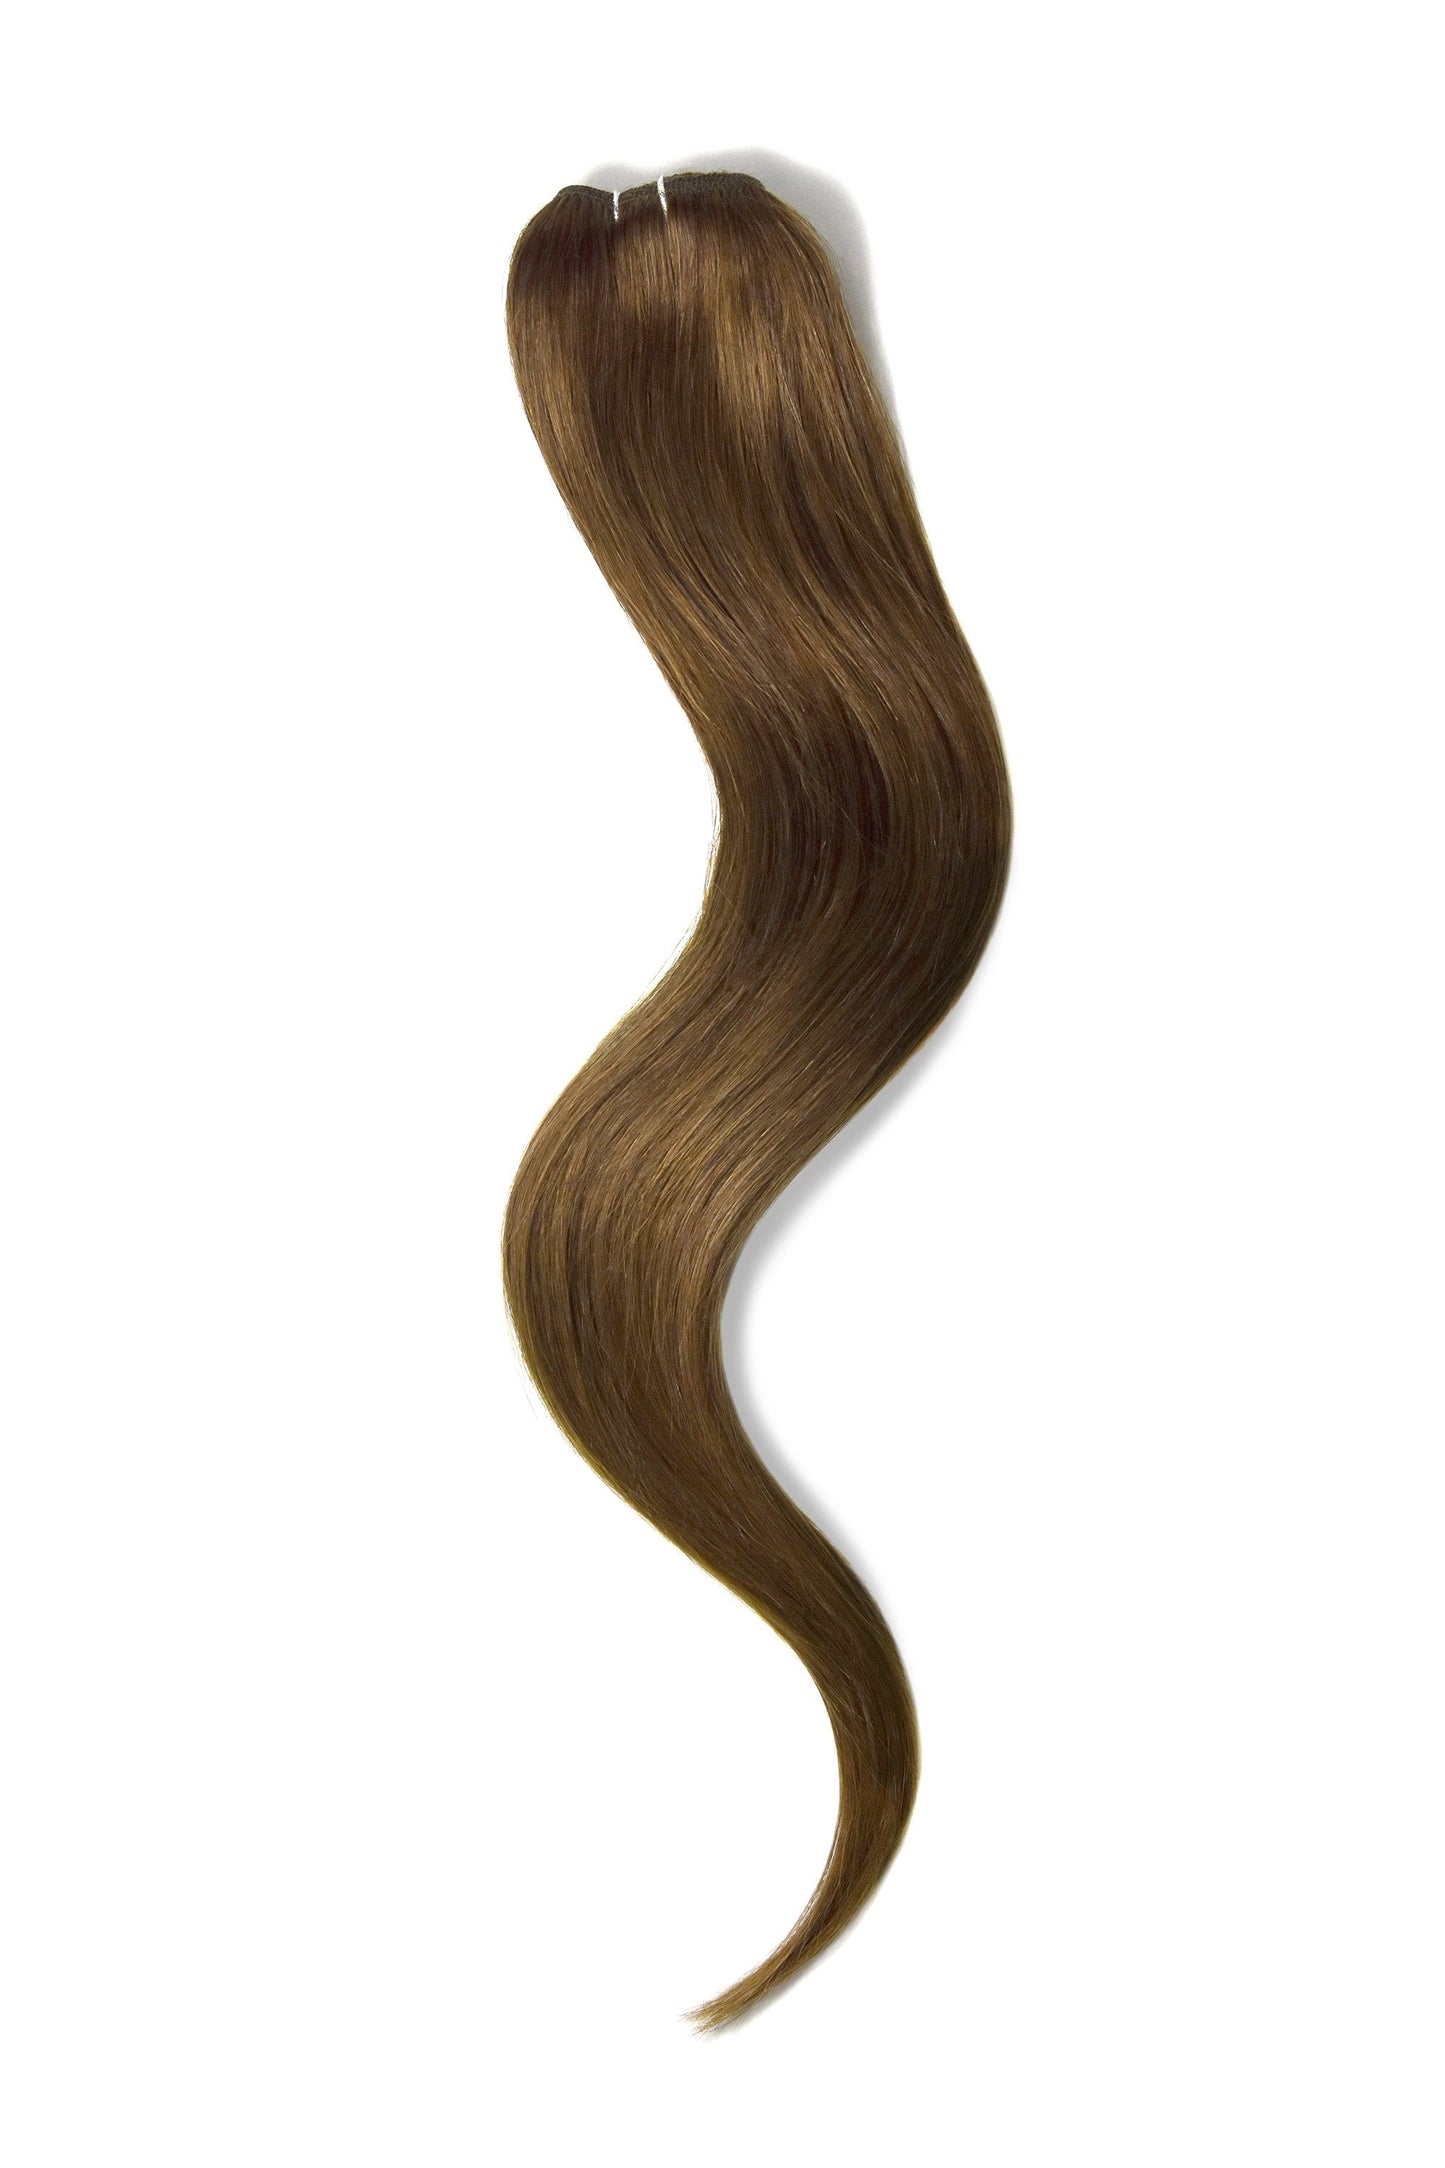  One Piece Top-up Remy Clip in Human Hair Extensions - Toffee Brown (#5)